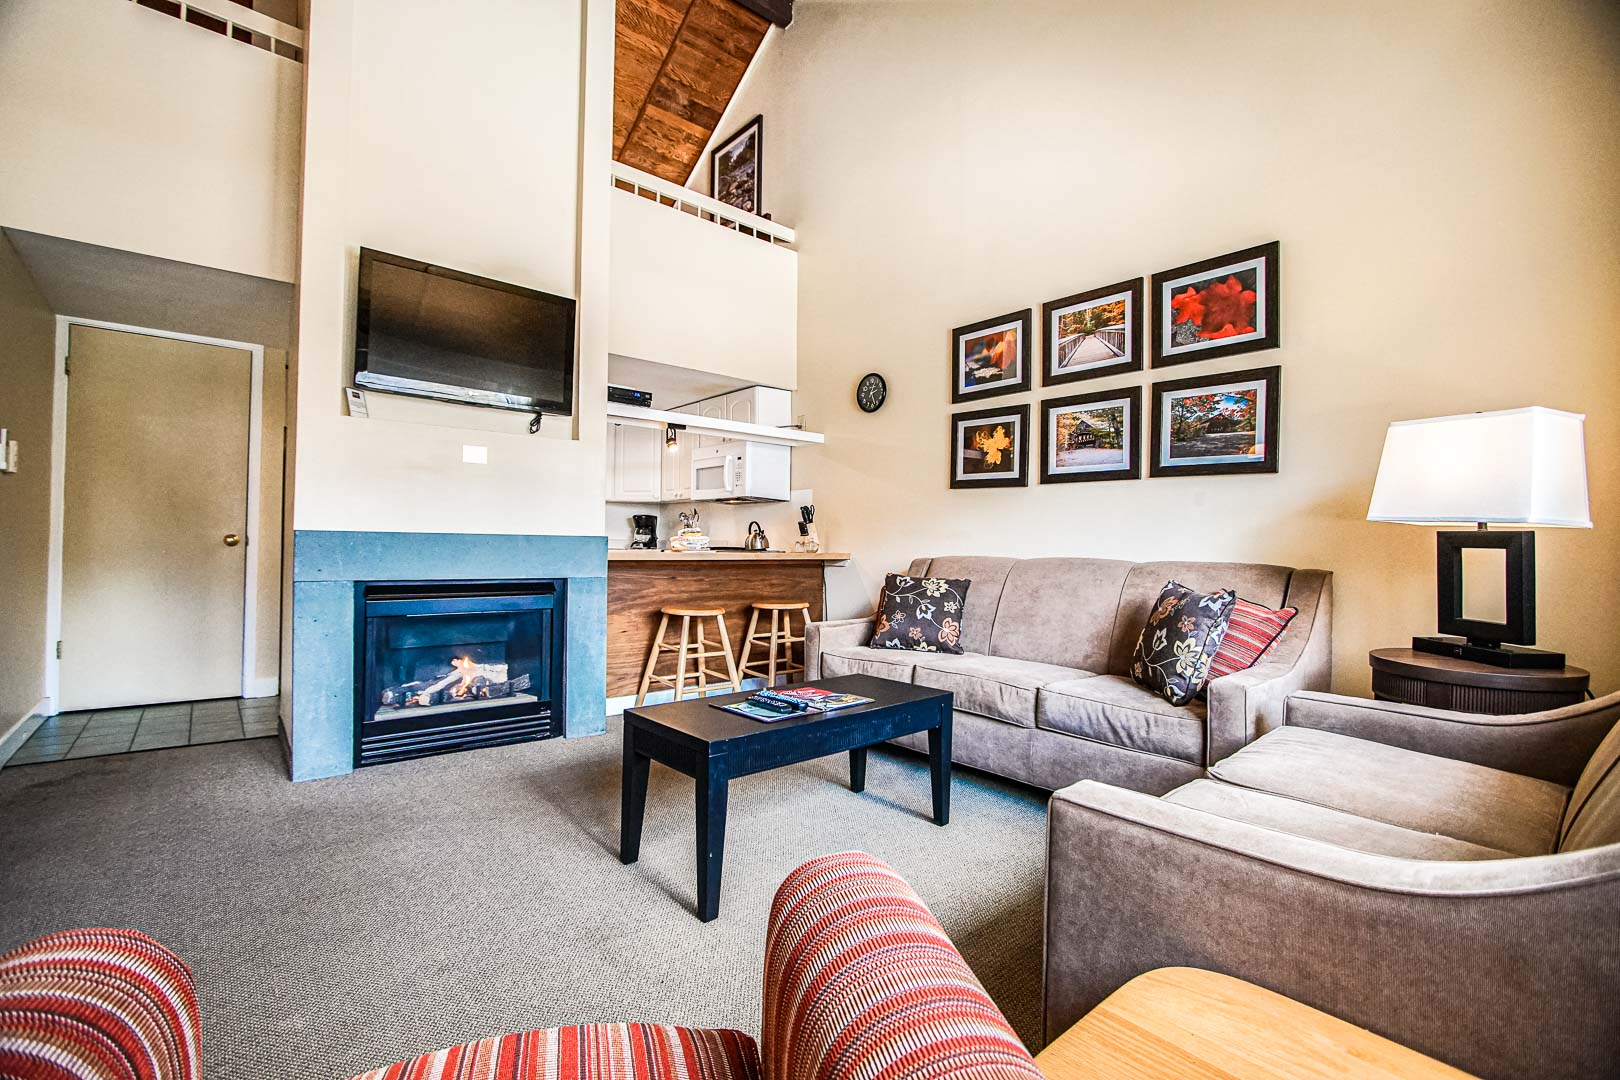 A spacious living room area at VRI's Village of Loon Mountain in New Hampshire.